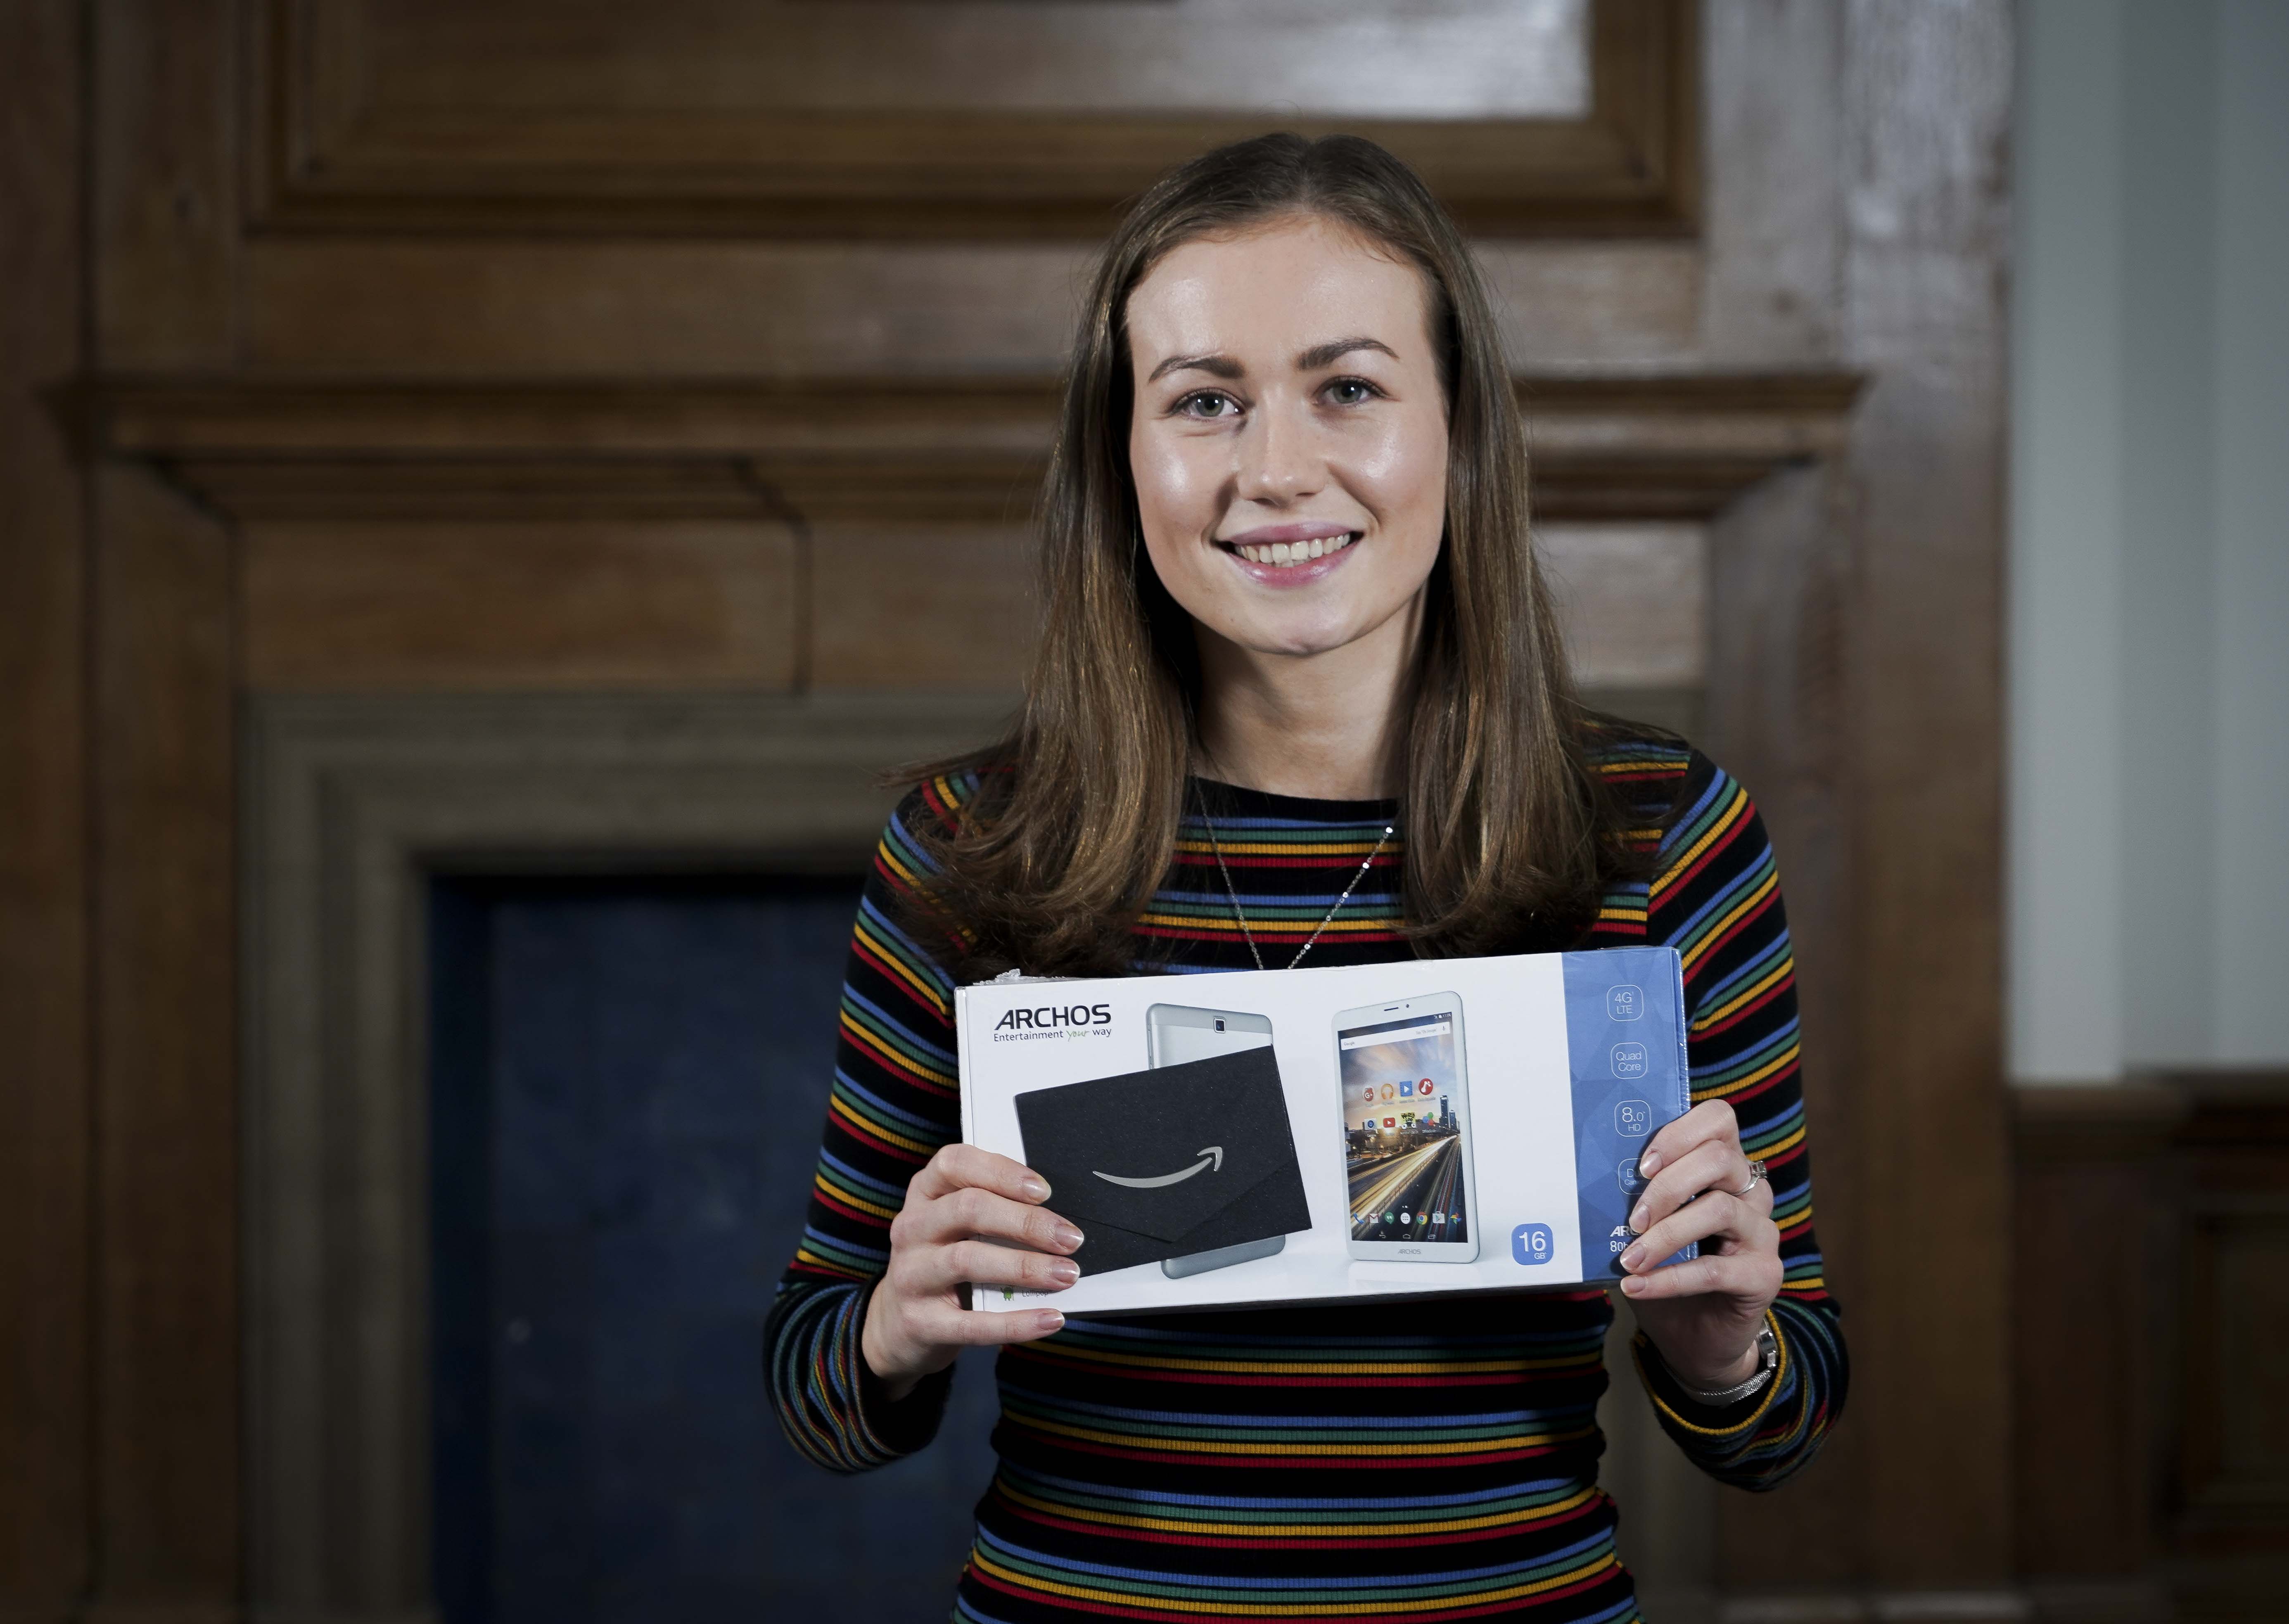 Alice holding her prize of a tablet and voucher as the winner of the 2018 EXPRESS competition